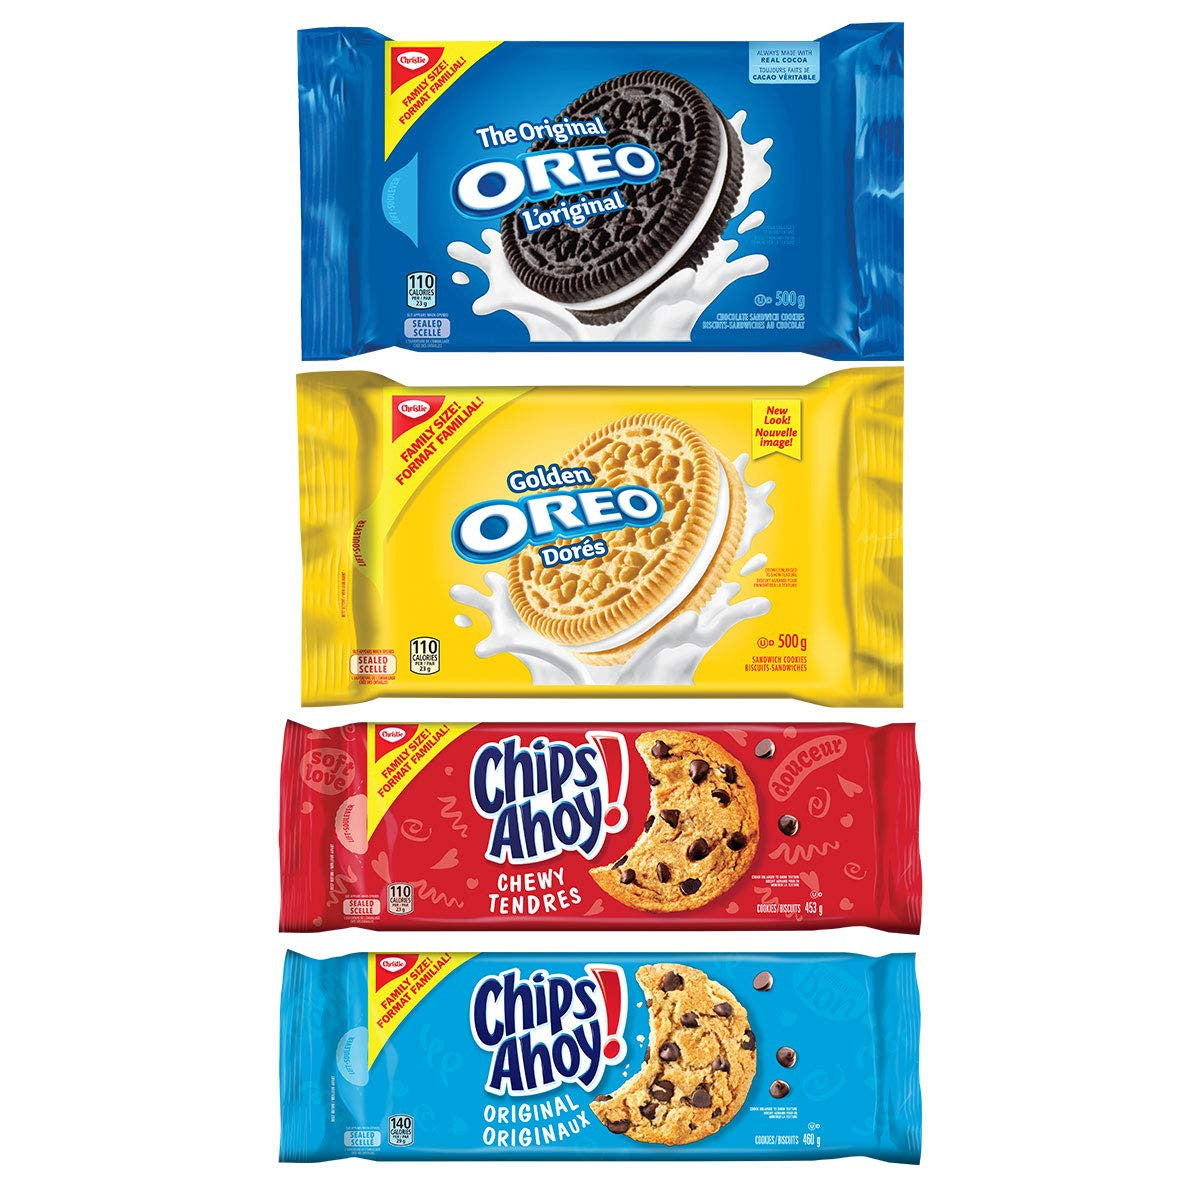 Christie Oreo & Chips Ahoy! Cookies Variety Pack, Family Size, 4 Packs, 1.91kg/4.2 lbs., {Imported from Canada}